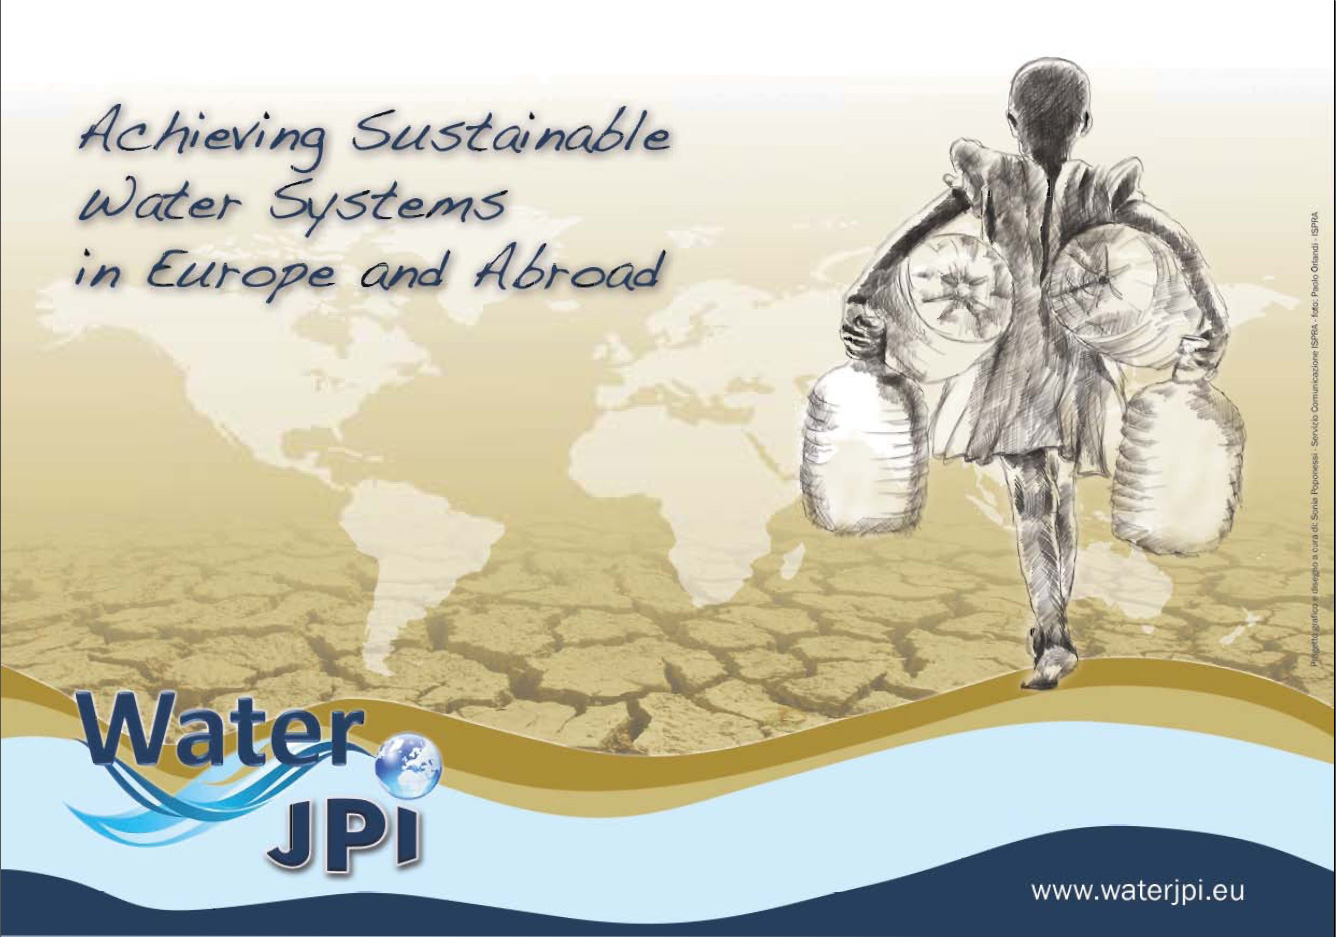 Achieving Sustainable Water Systems in Europe and Abroad